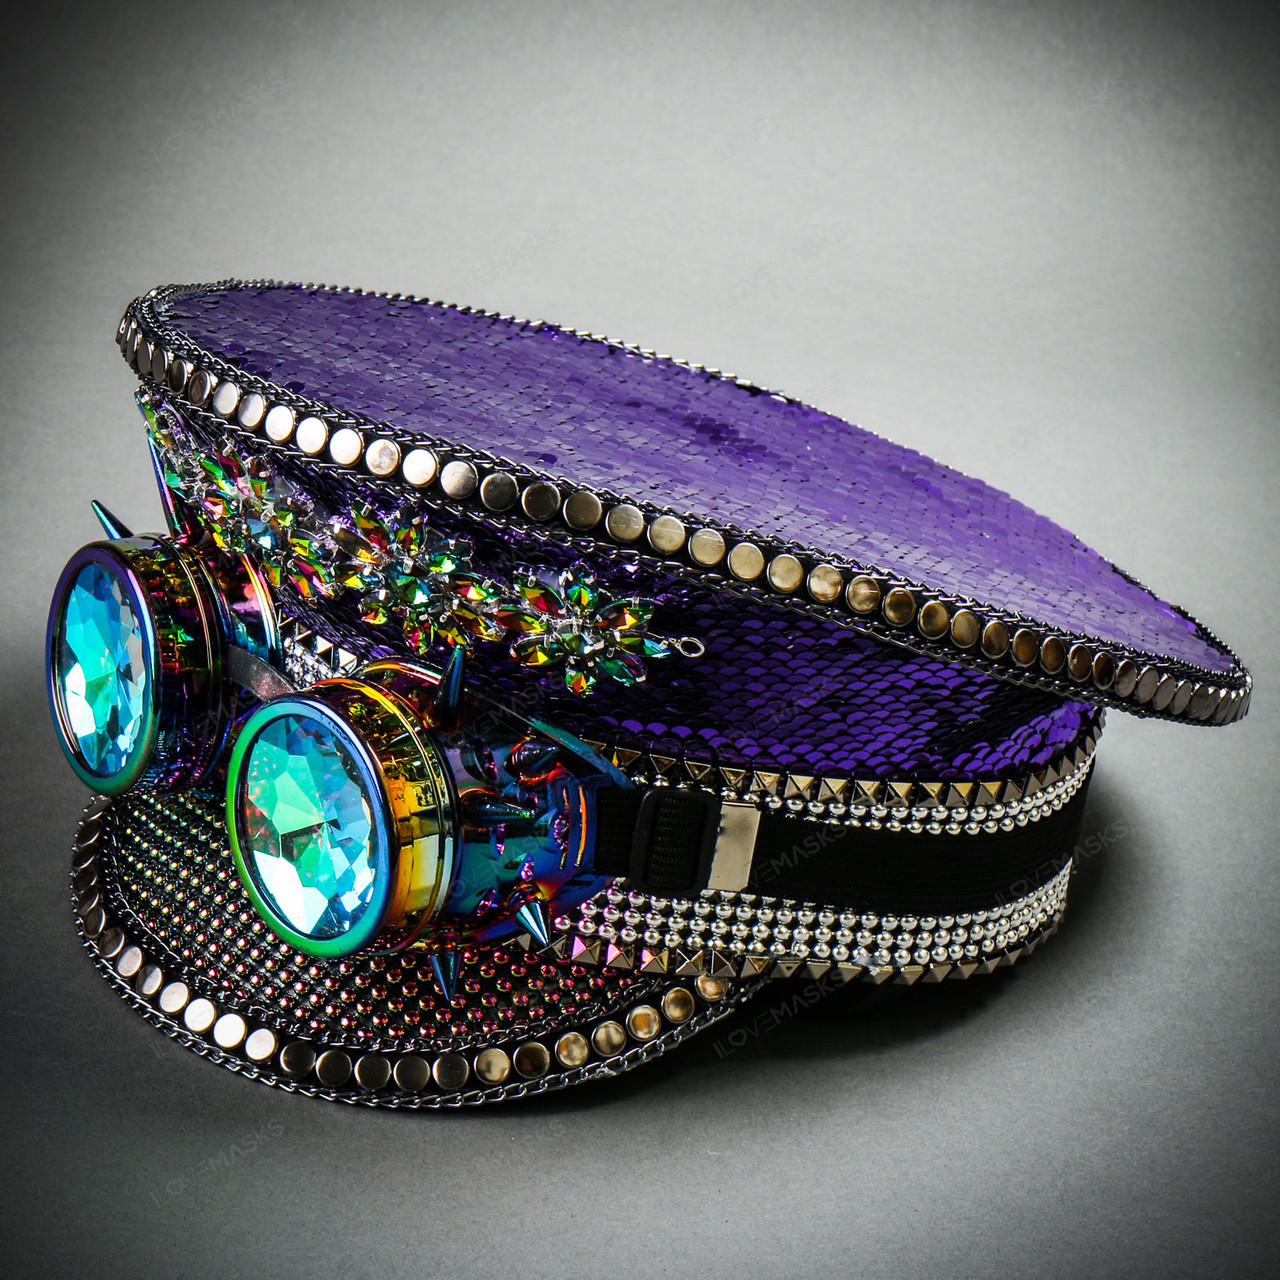 Steampunk Burning Man Captain Hat with Kaleidoscope 3D Goggles - Purple